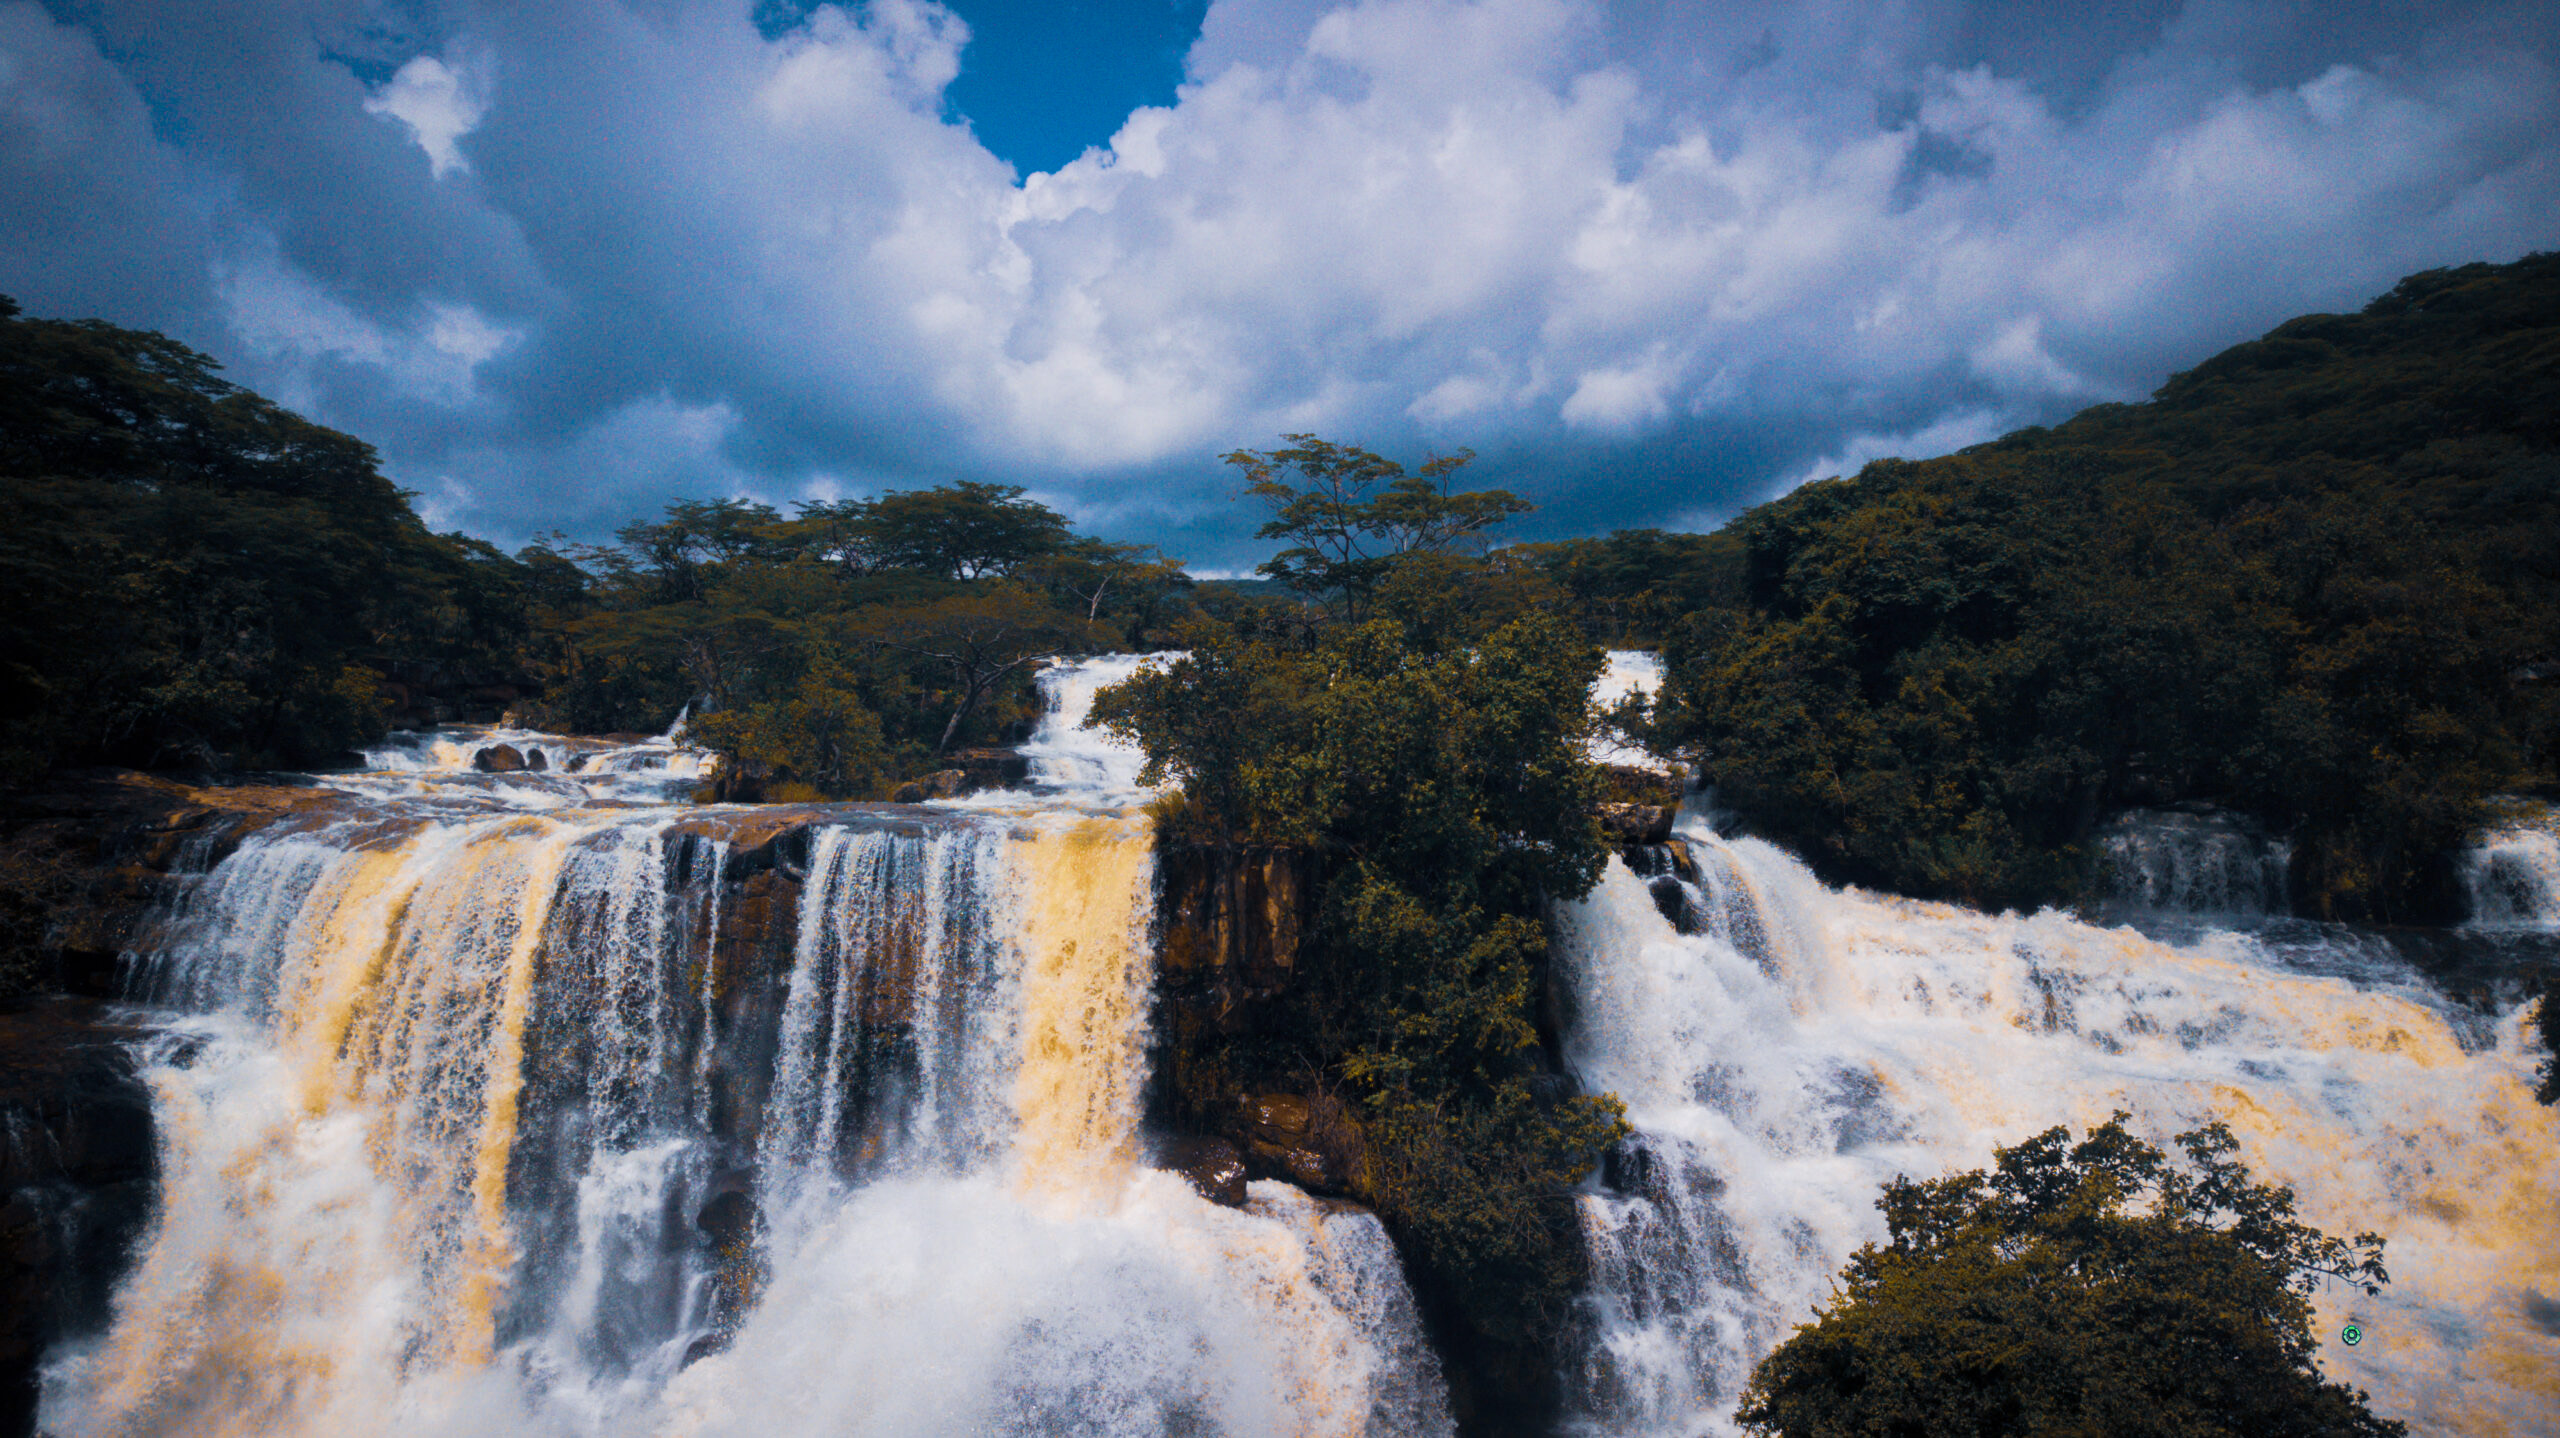 Kimani Falls tour Kimani falls is Located in Mbeya - Tanzania, one of the best attraction in Mpanga-Kipengere Game Reserve along the Kimani river. The falls is 250 meters high with many huge plunge pool at the base.